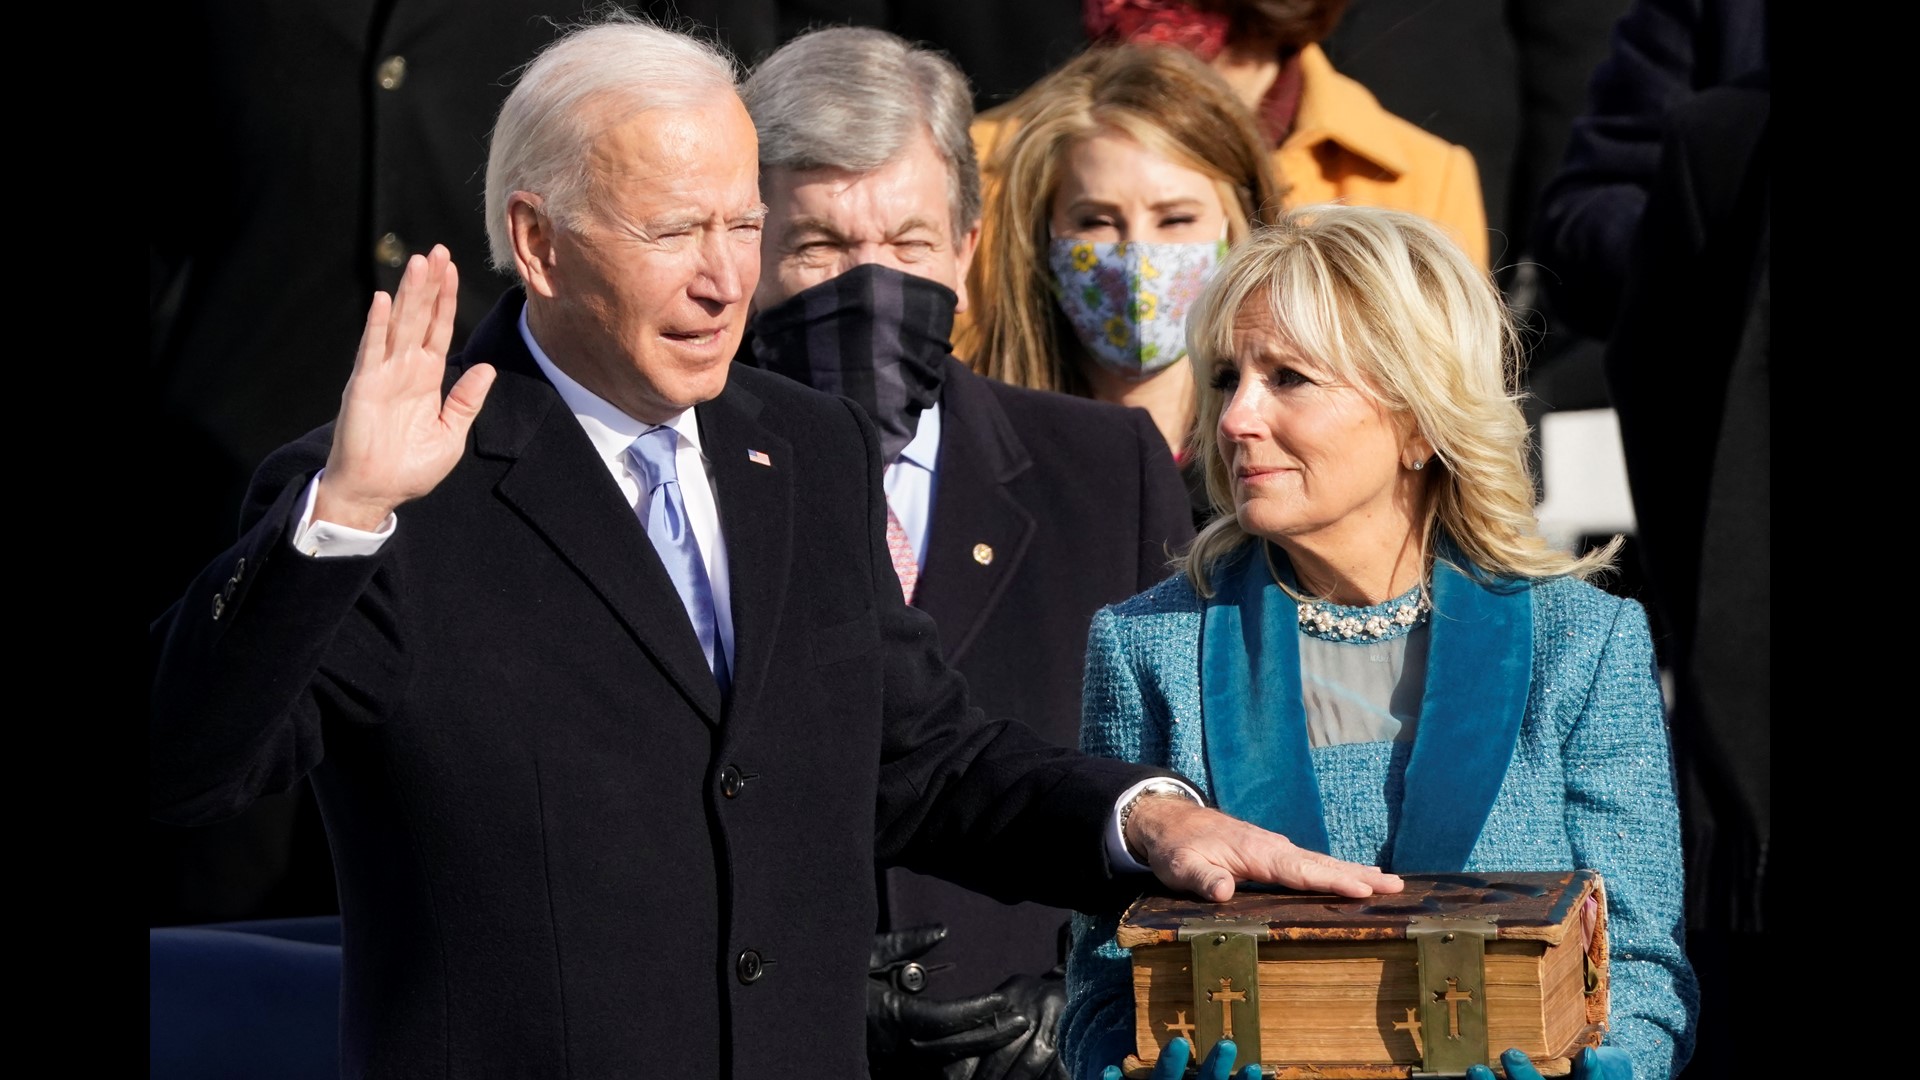 Joe Biden was sworn in as president of the United States during a star studded inaugural event.